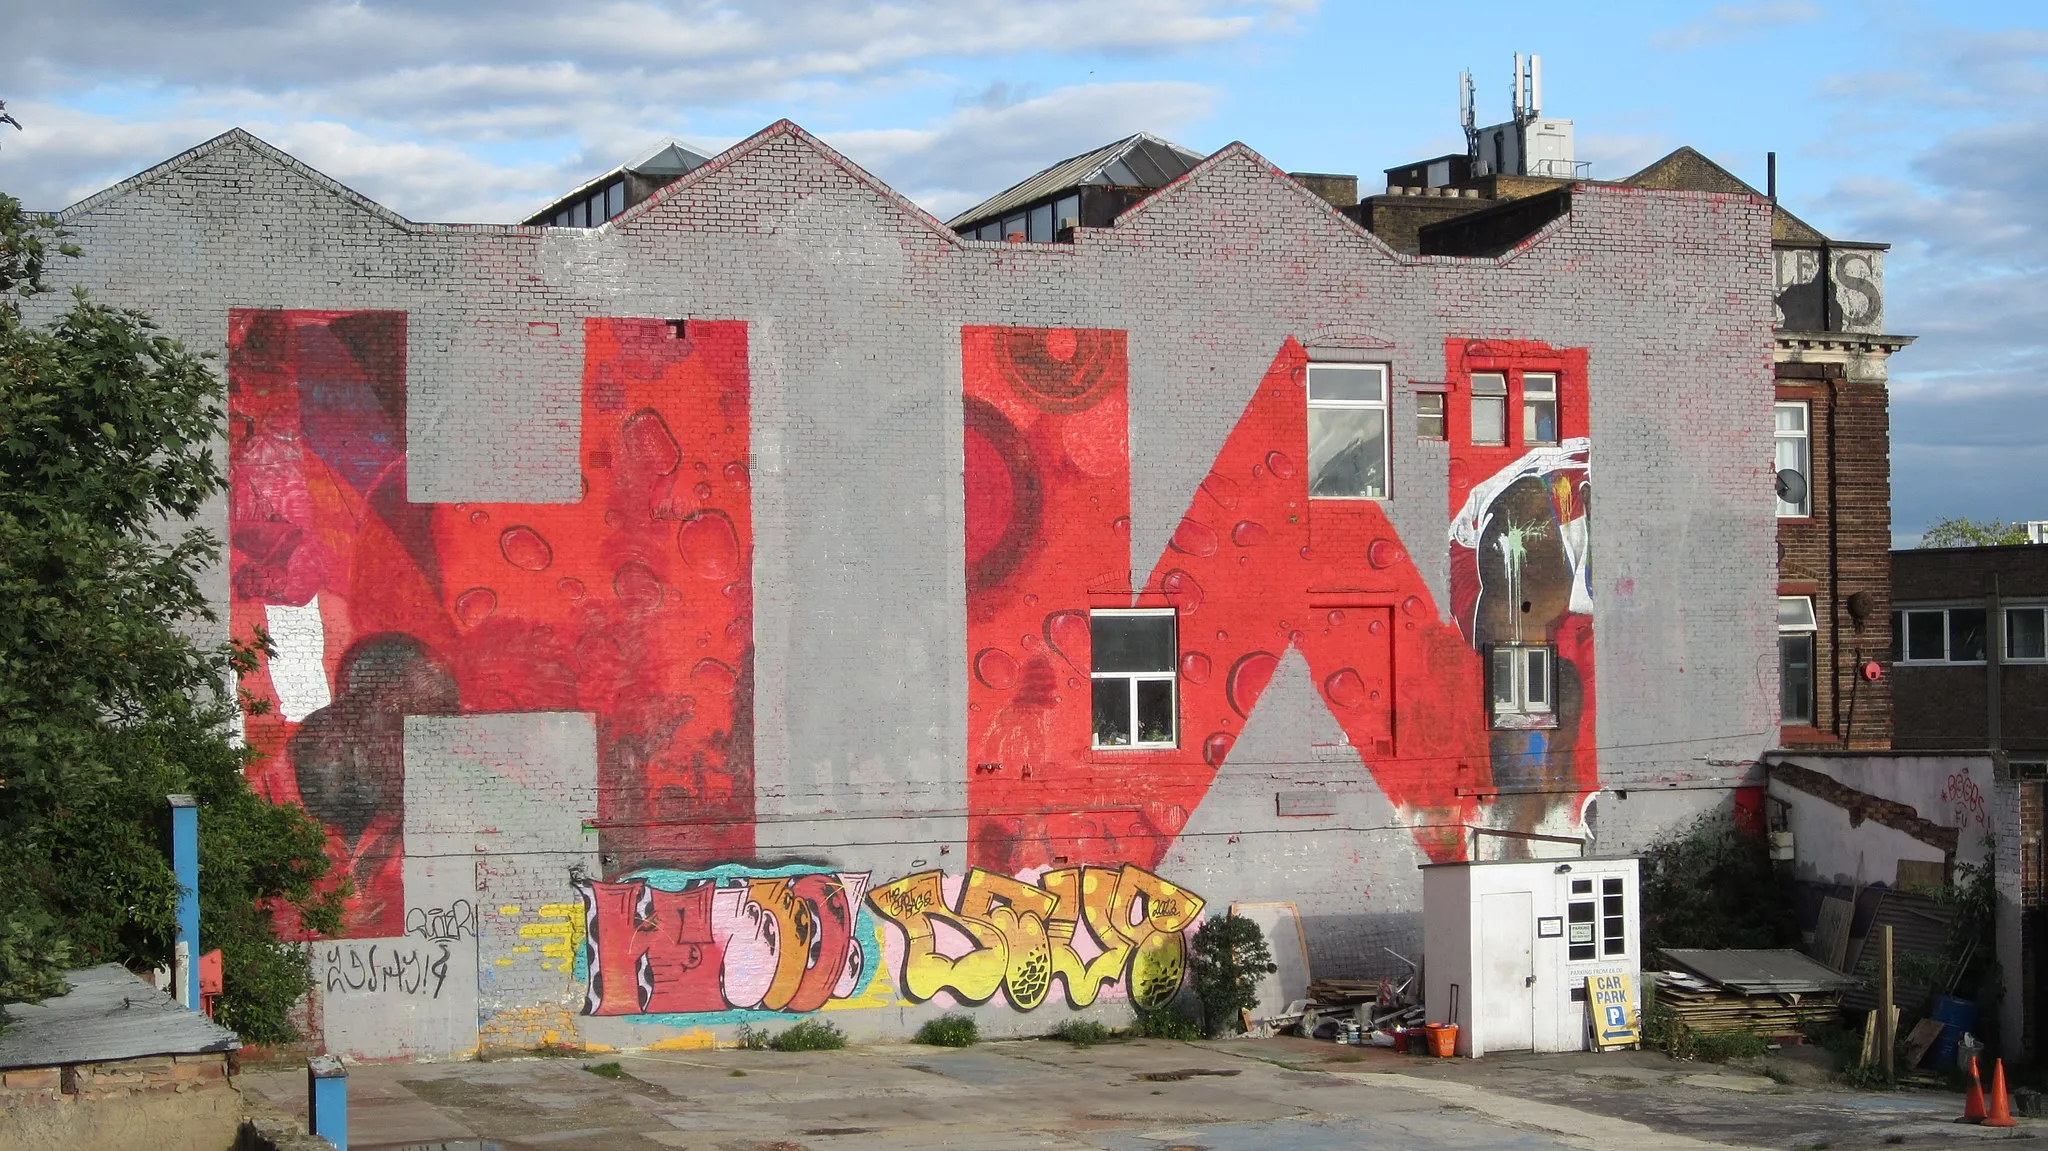 Photo showing: Photo of the Hackney Wick Coca Cola mural, taken in September 2013. The Coca Cola advertisement was painted in February 2012, in advance of the London Olympic Games hosted nearby. The advertisement was defiled by local artists and eventually over painted with the HW initials.